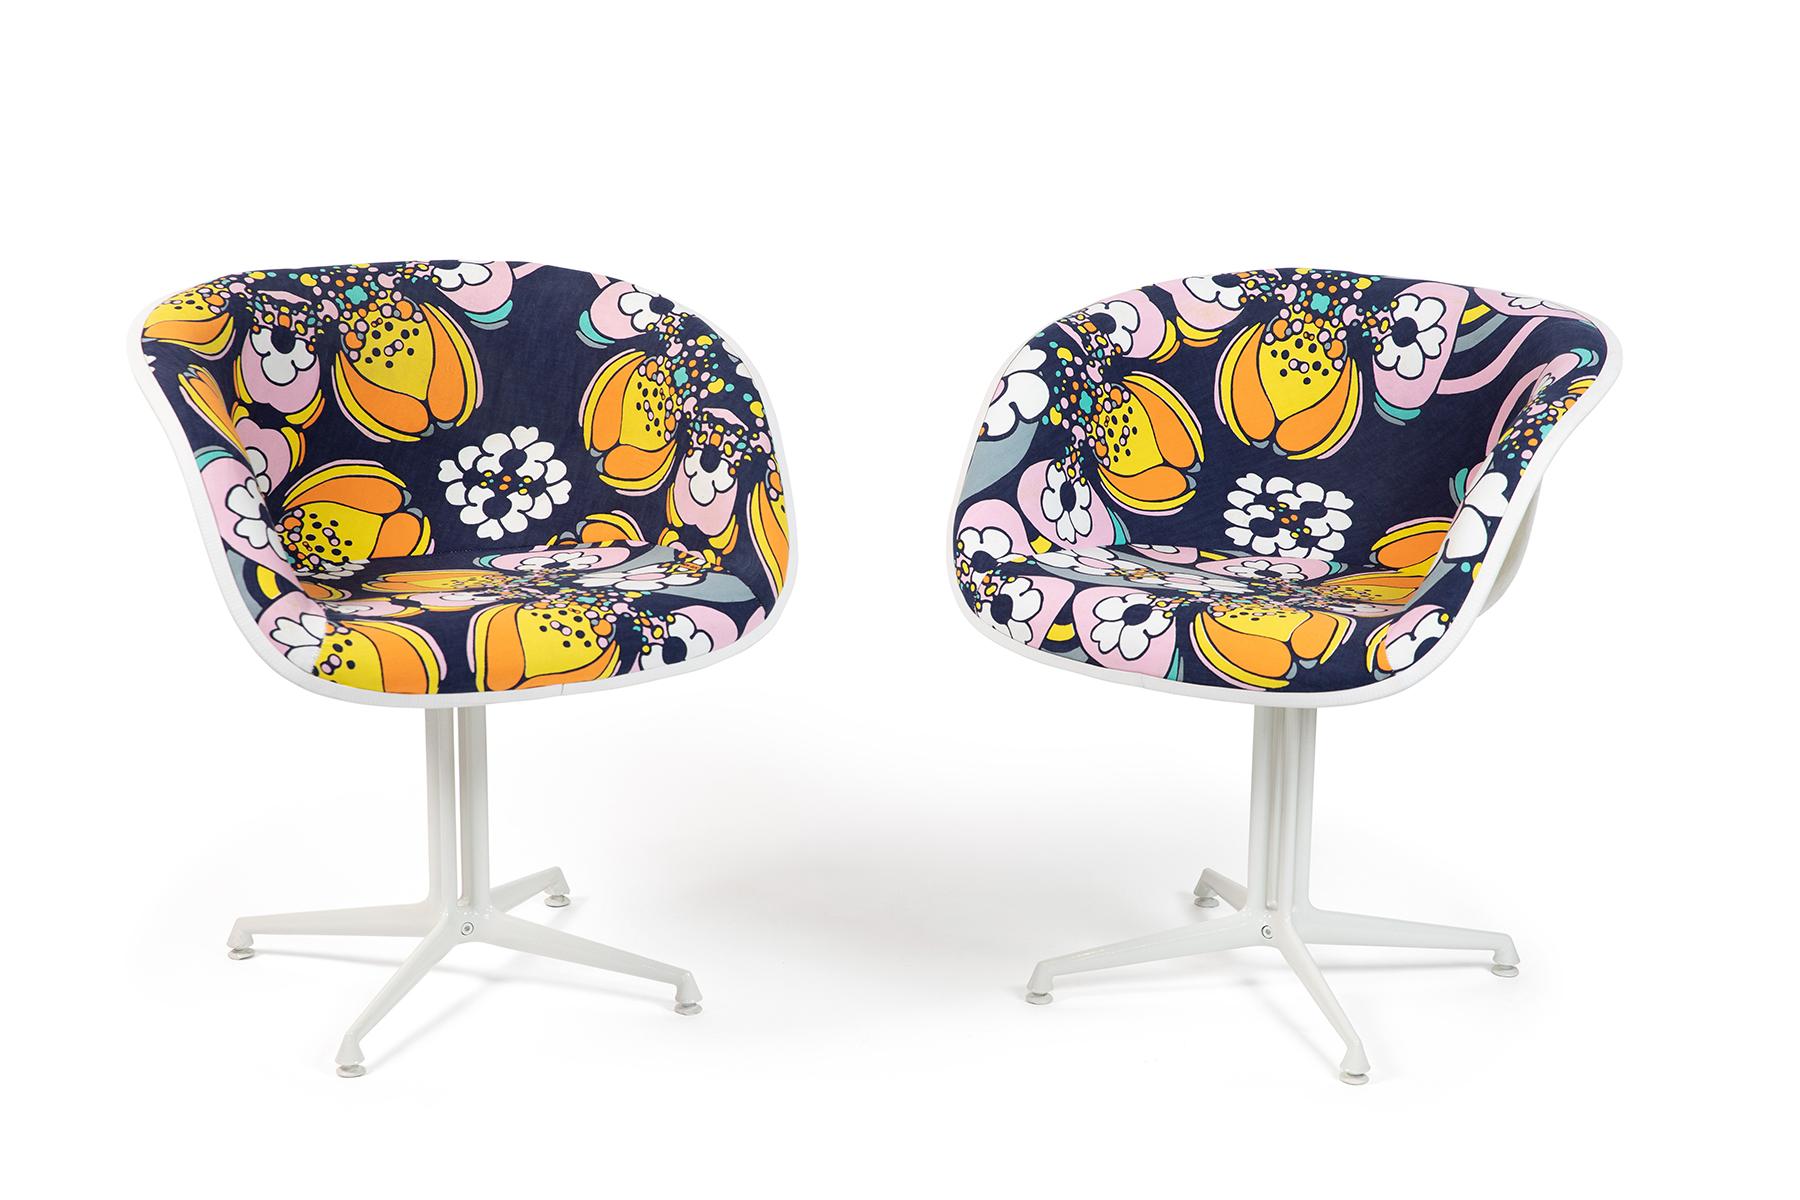 Pair of La Fonda chairs by Charles & Ray Eames for Herman Miller circa mid 1960s. These seldom seen examples have white powder coated La Fonda bases and have been upholstered in a playful psychedelic dead stock Peter Max fabric. Price listed is for